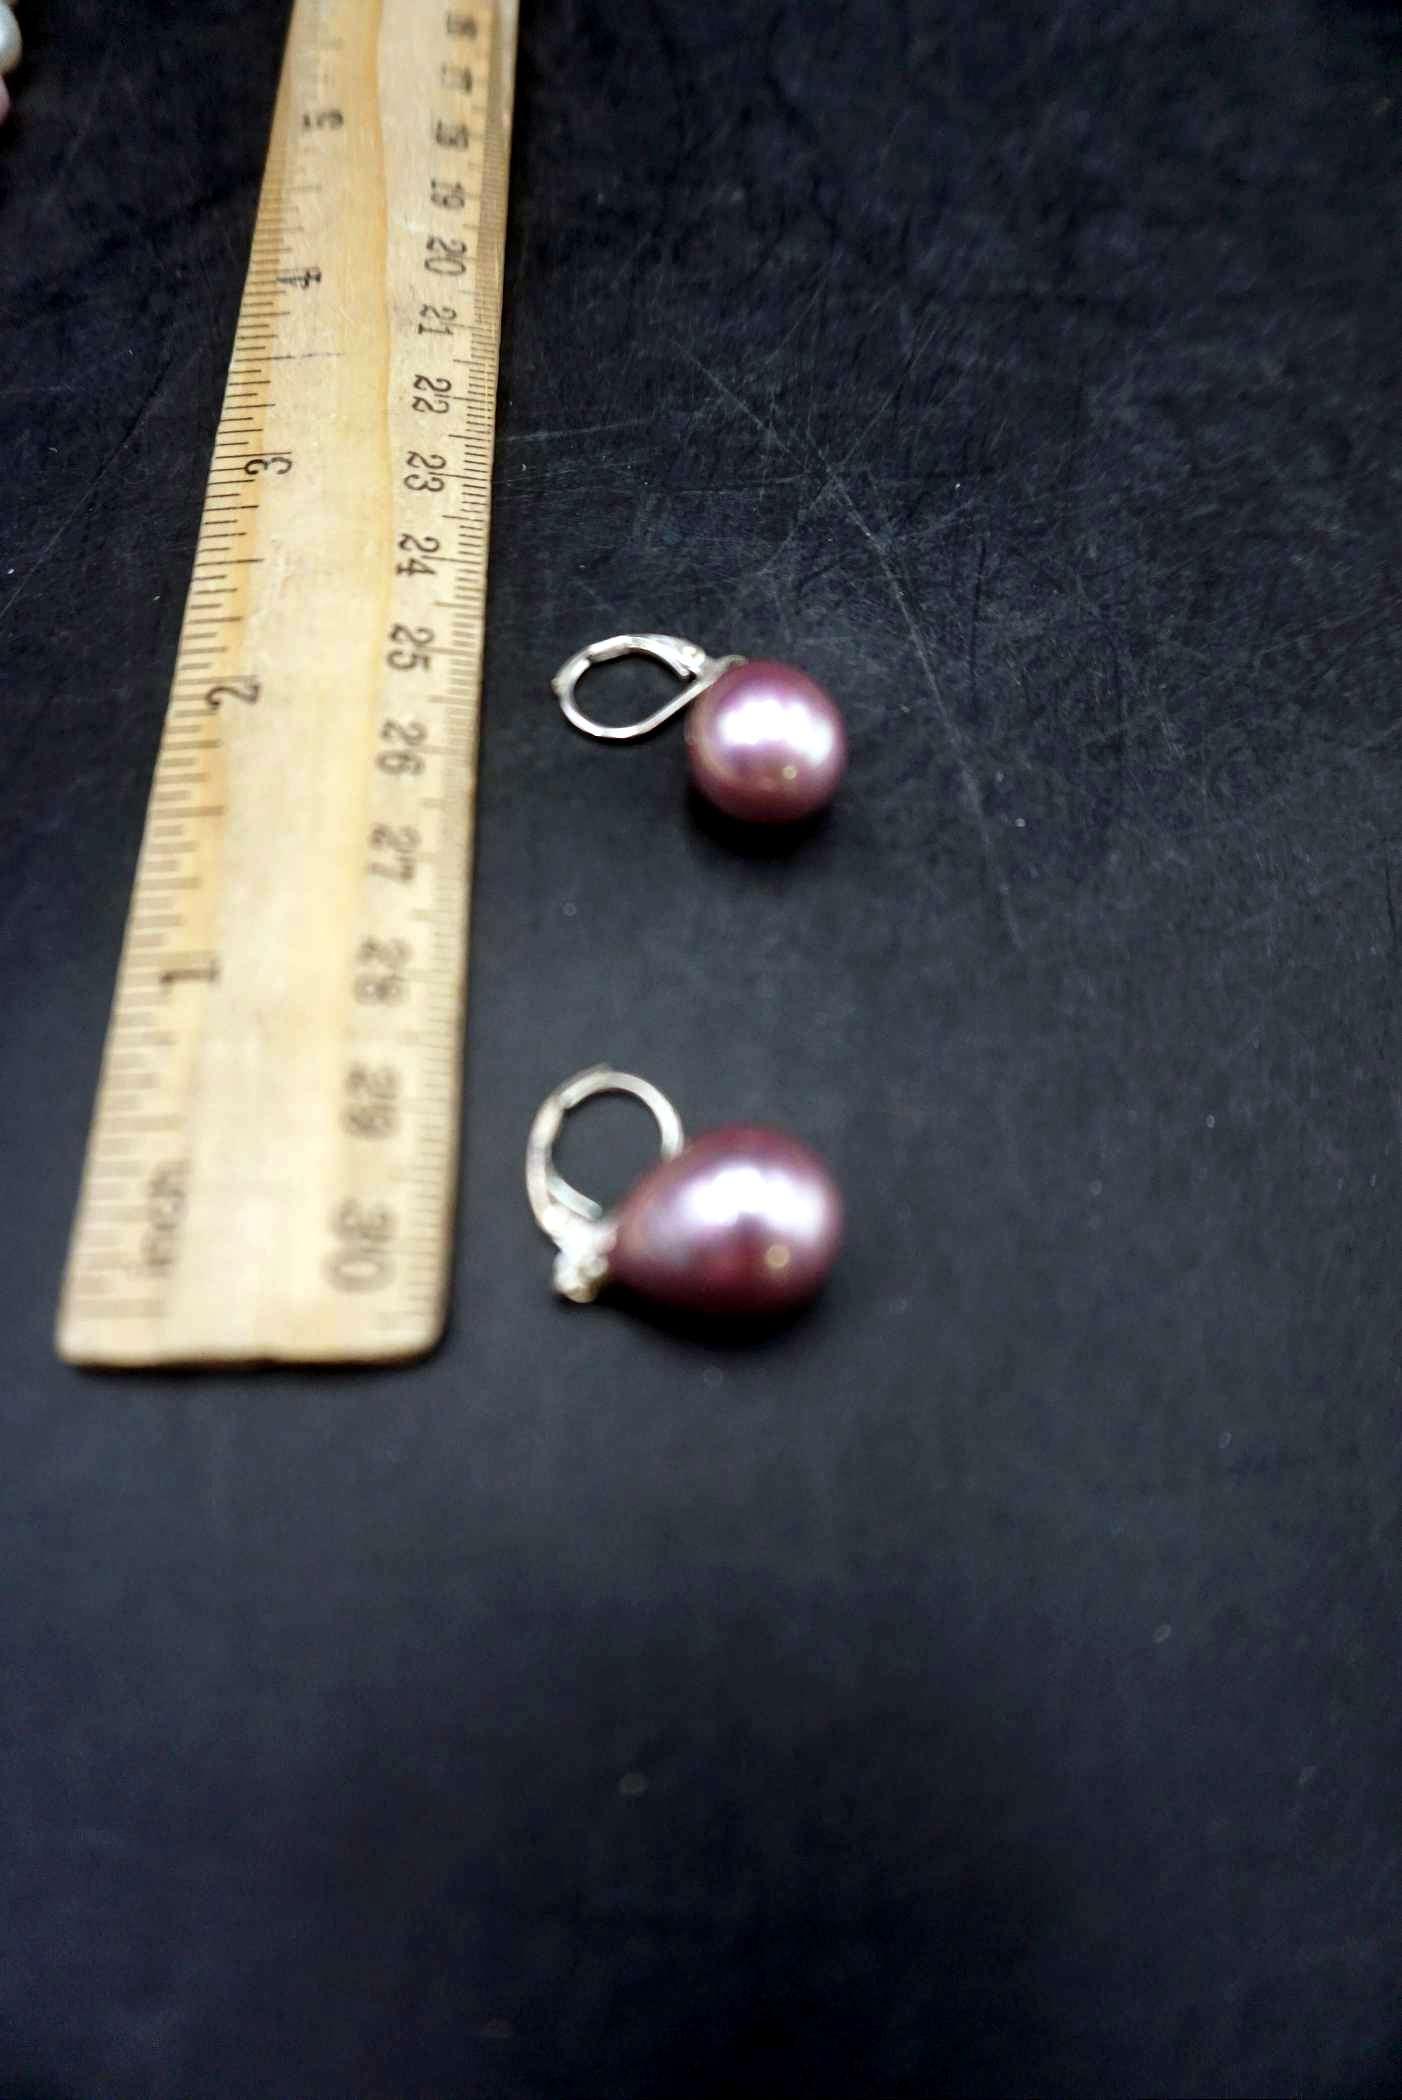 Real Pearl Necklace & Earrings